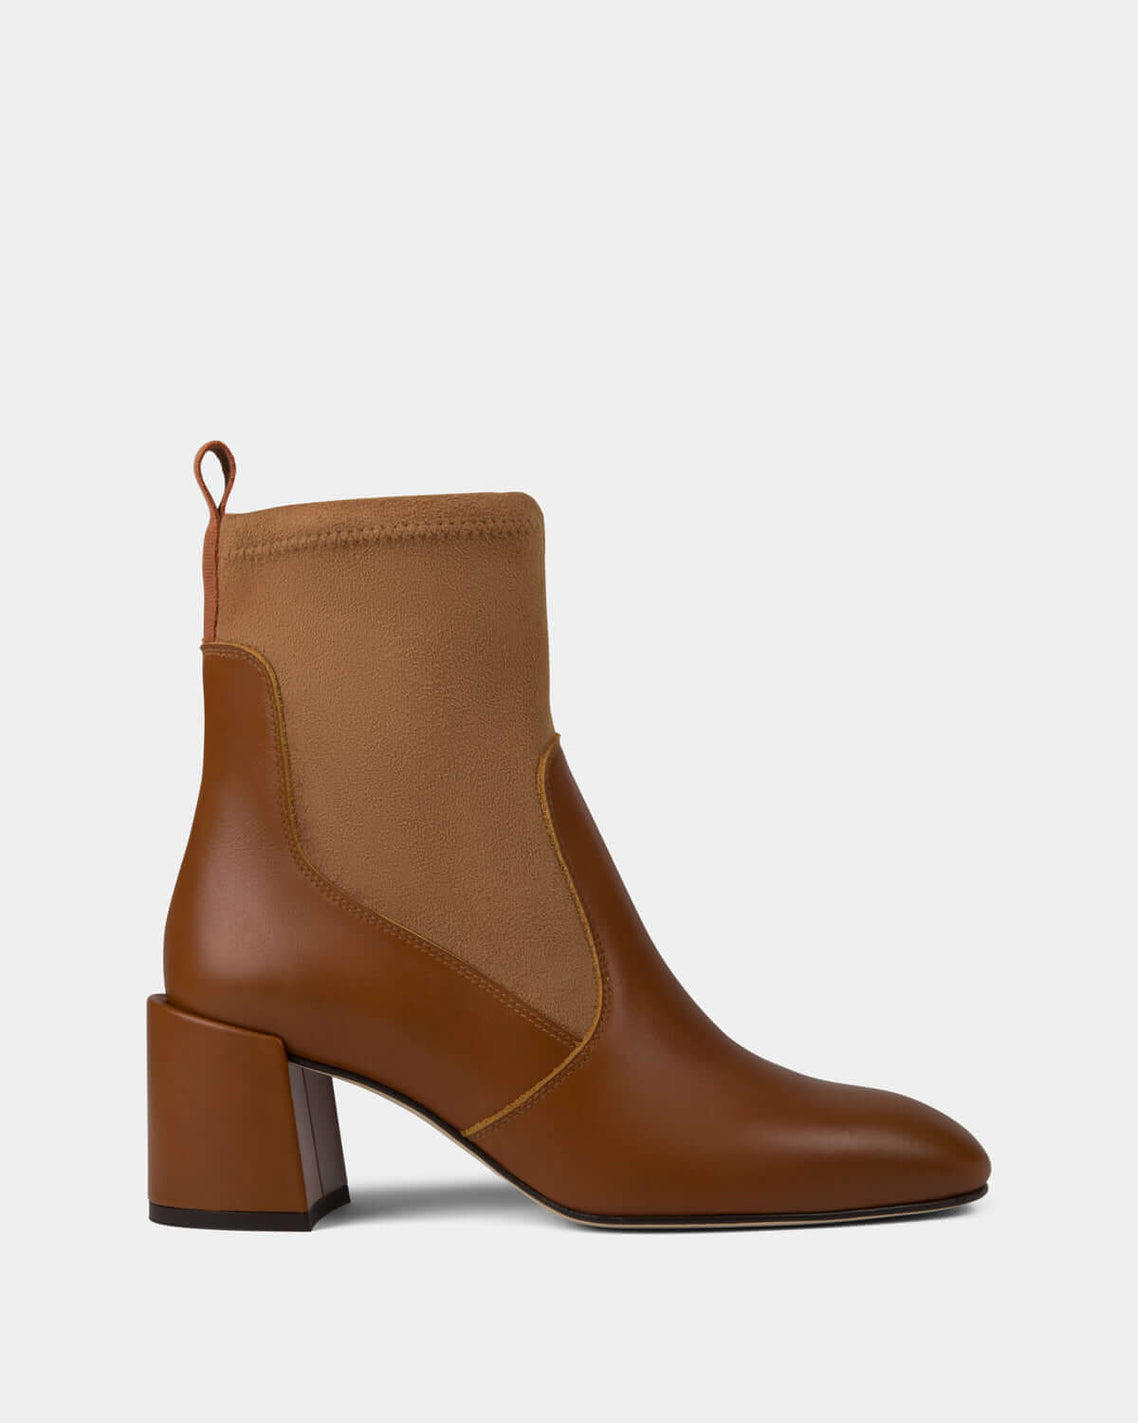 kallu-kallú-light-brown-nappa-leather-shoes-for-women-made-in-spain-boots-ankle-boots-booties-low-cut-boots